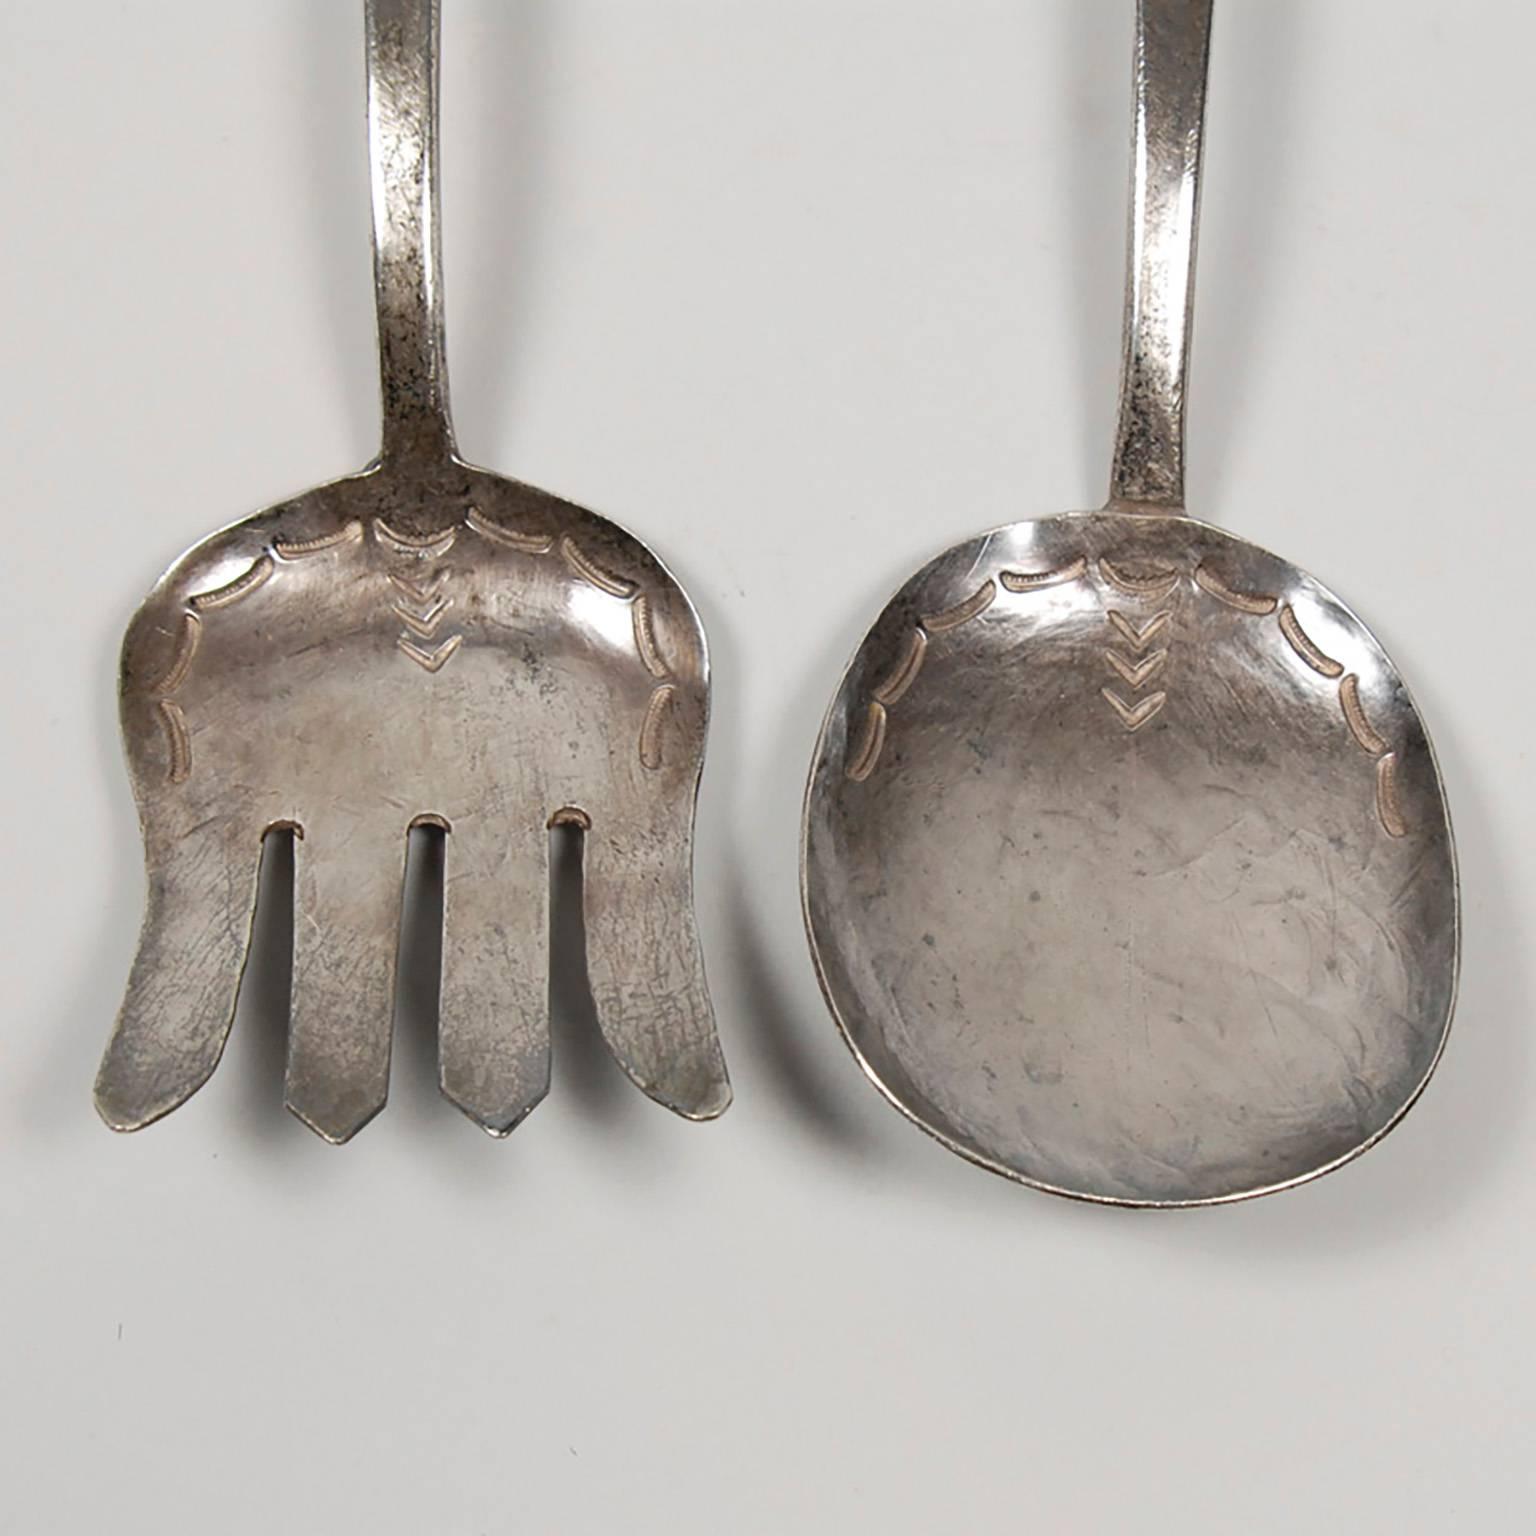 Set of Native American Navajo silver servers, early 20th century.
Length: 9.5 inches.